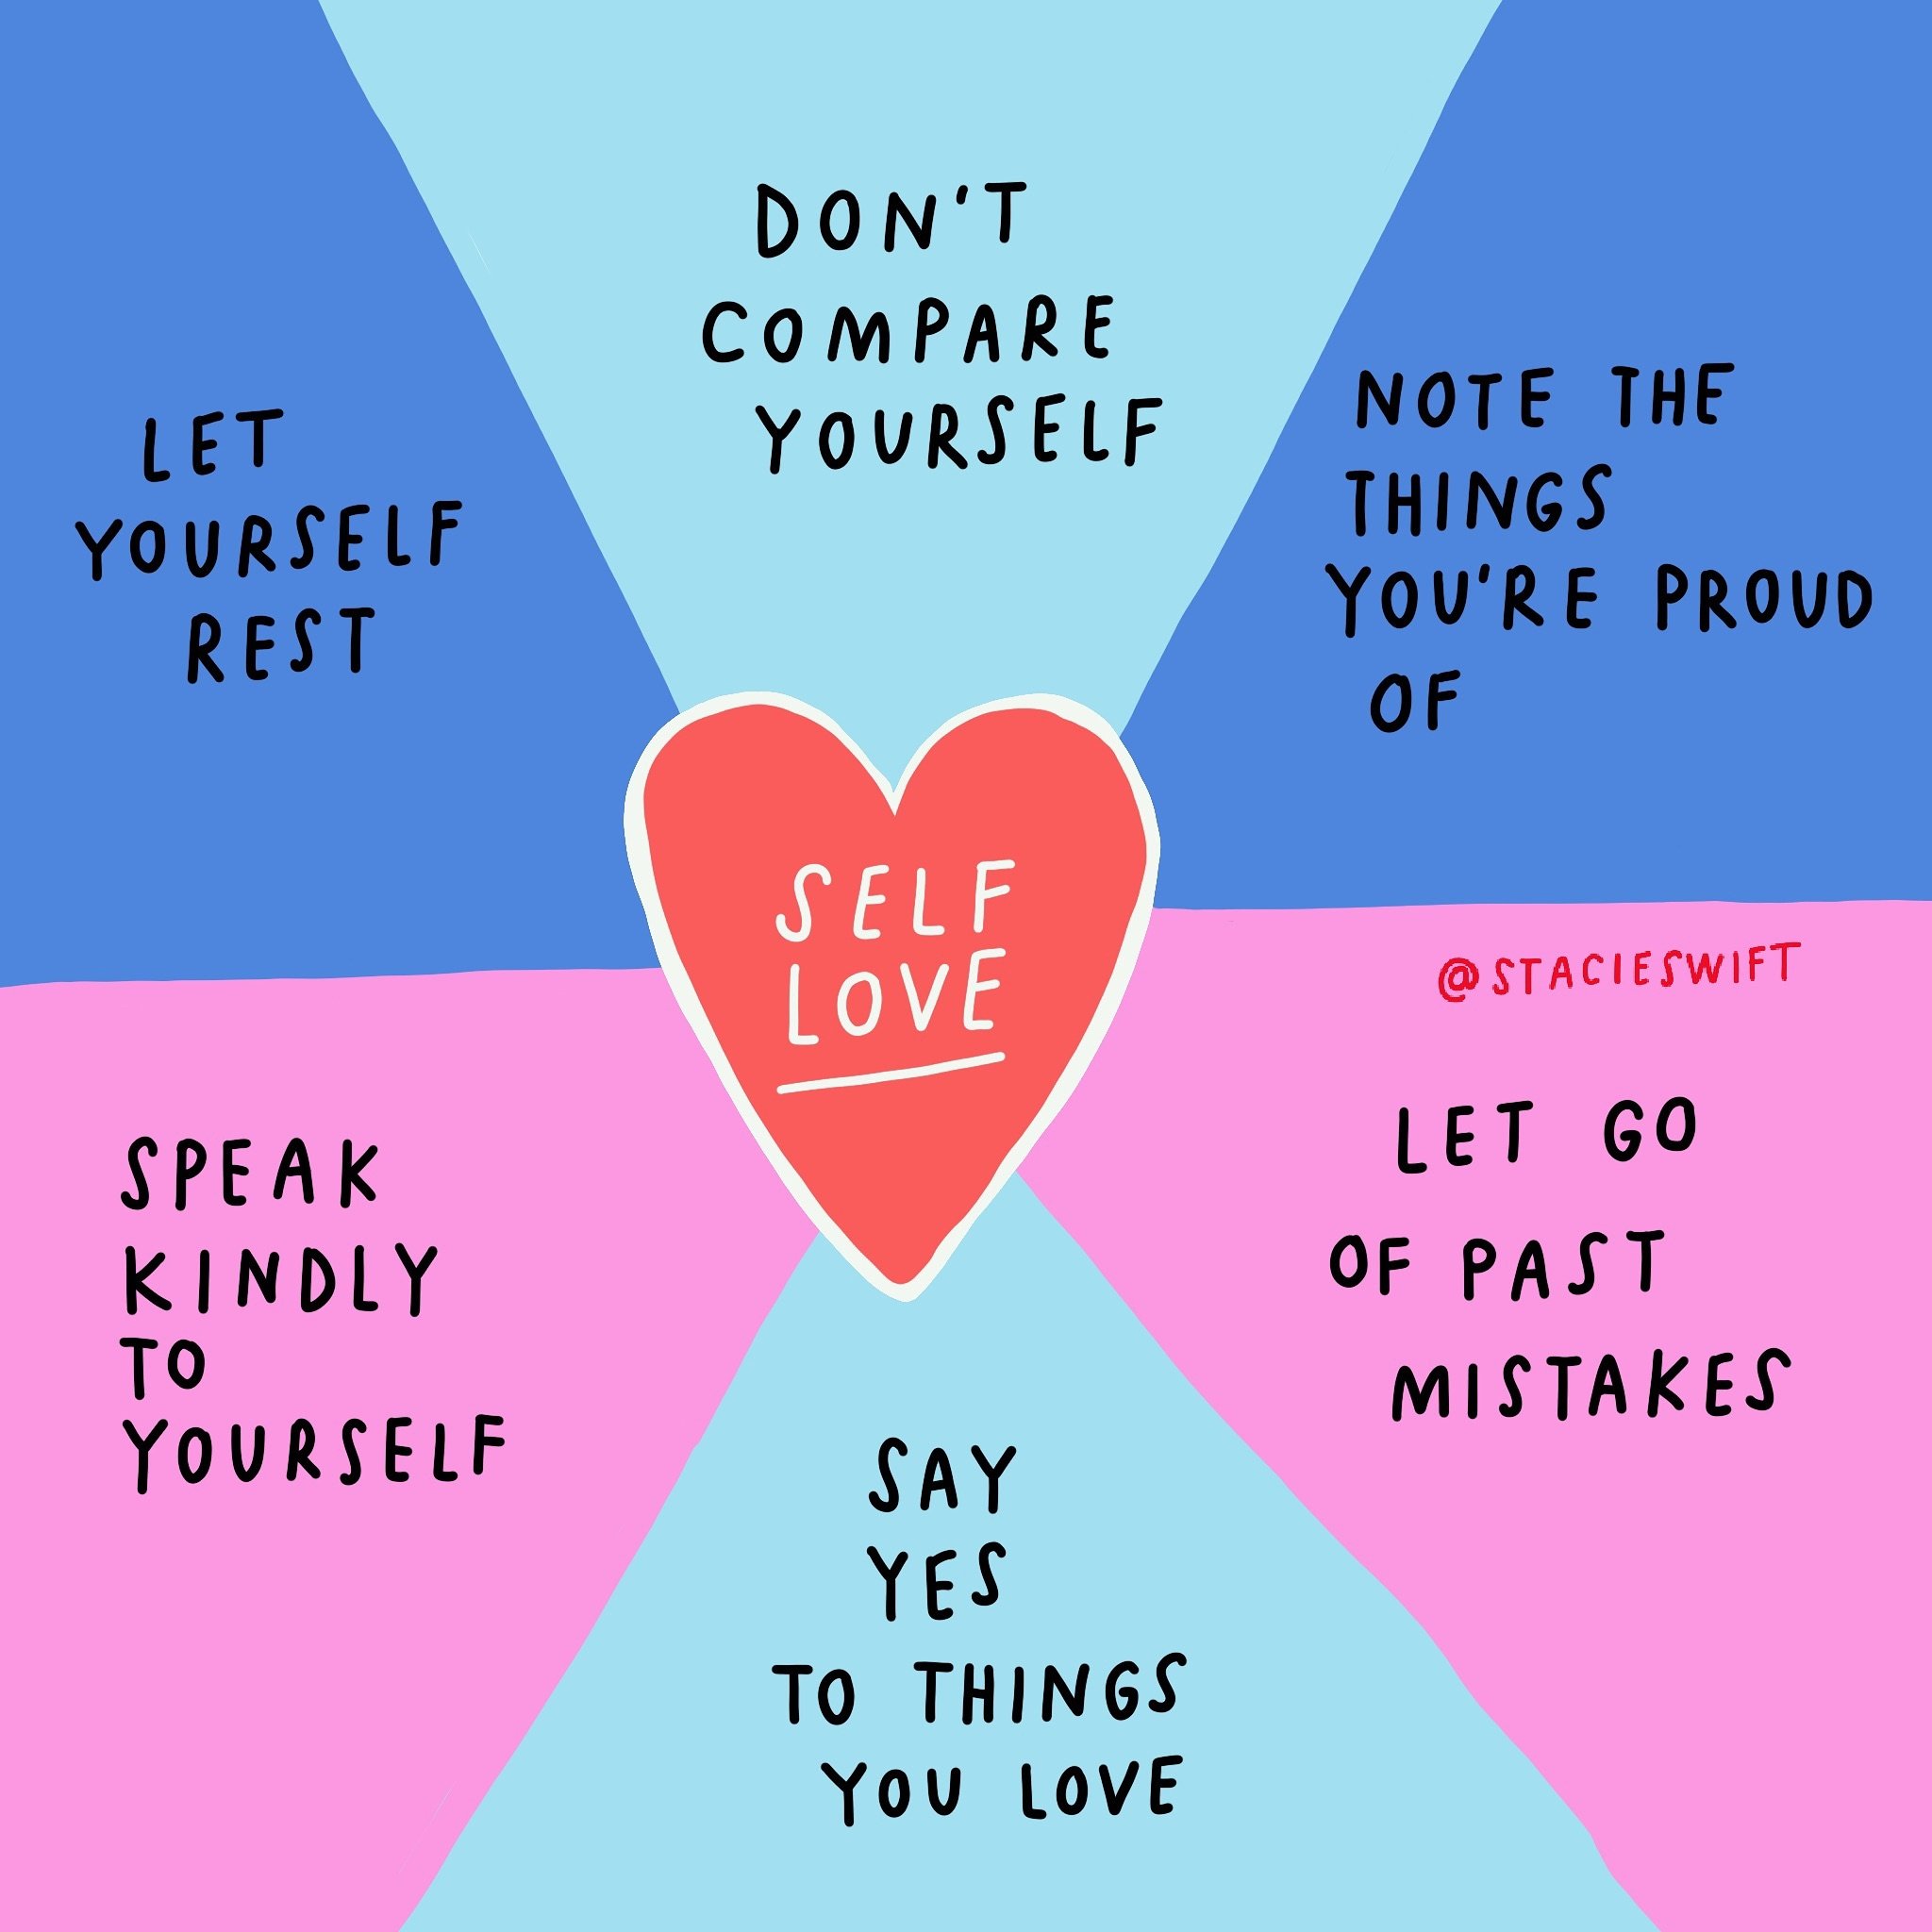 💖 Self-Care Saturday plans 💖

What can you tick off this list today?